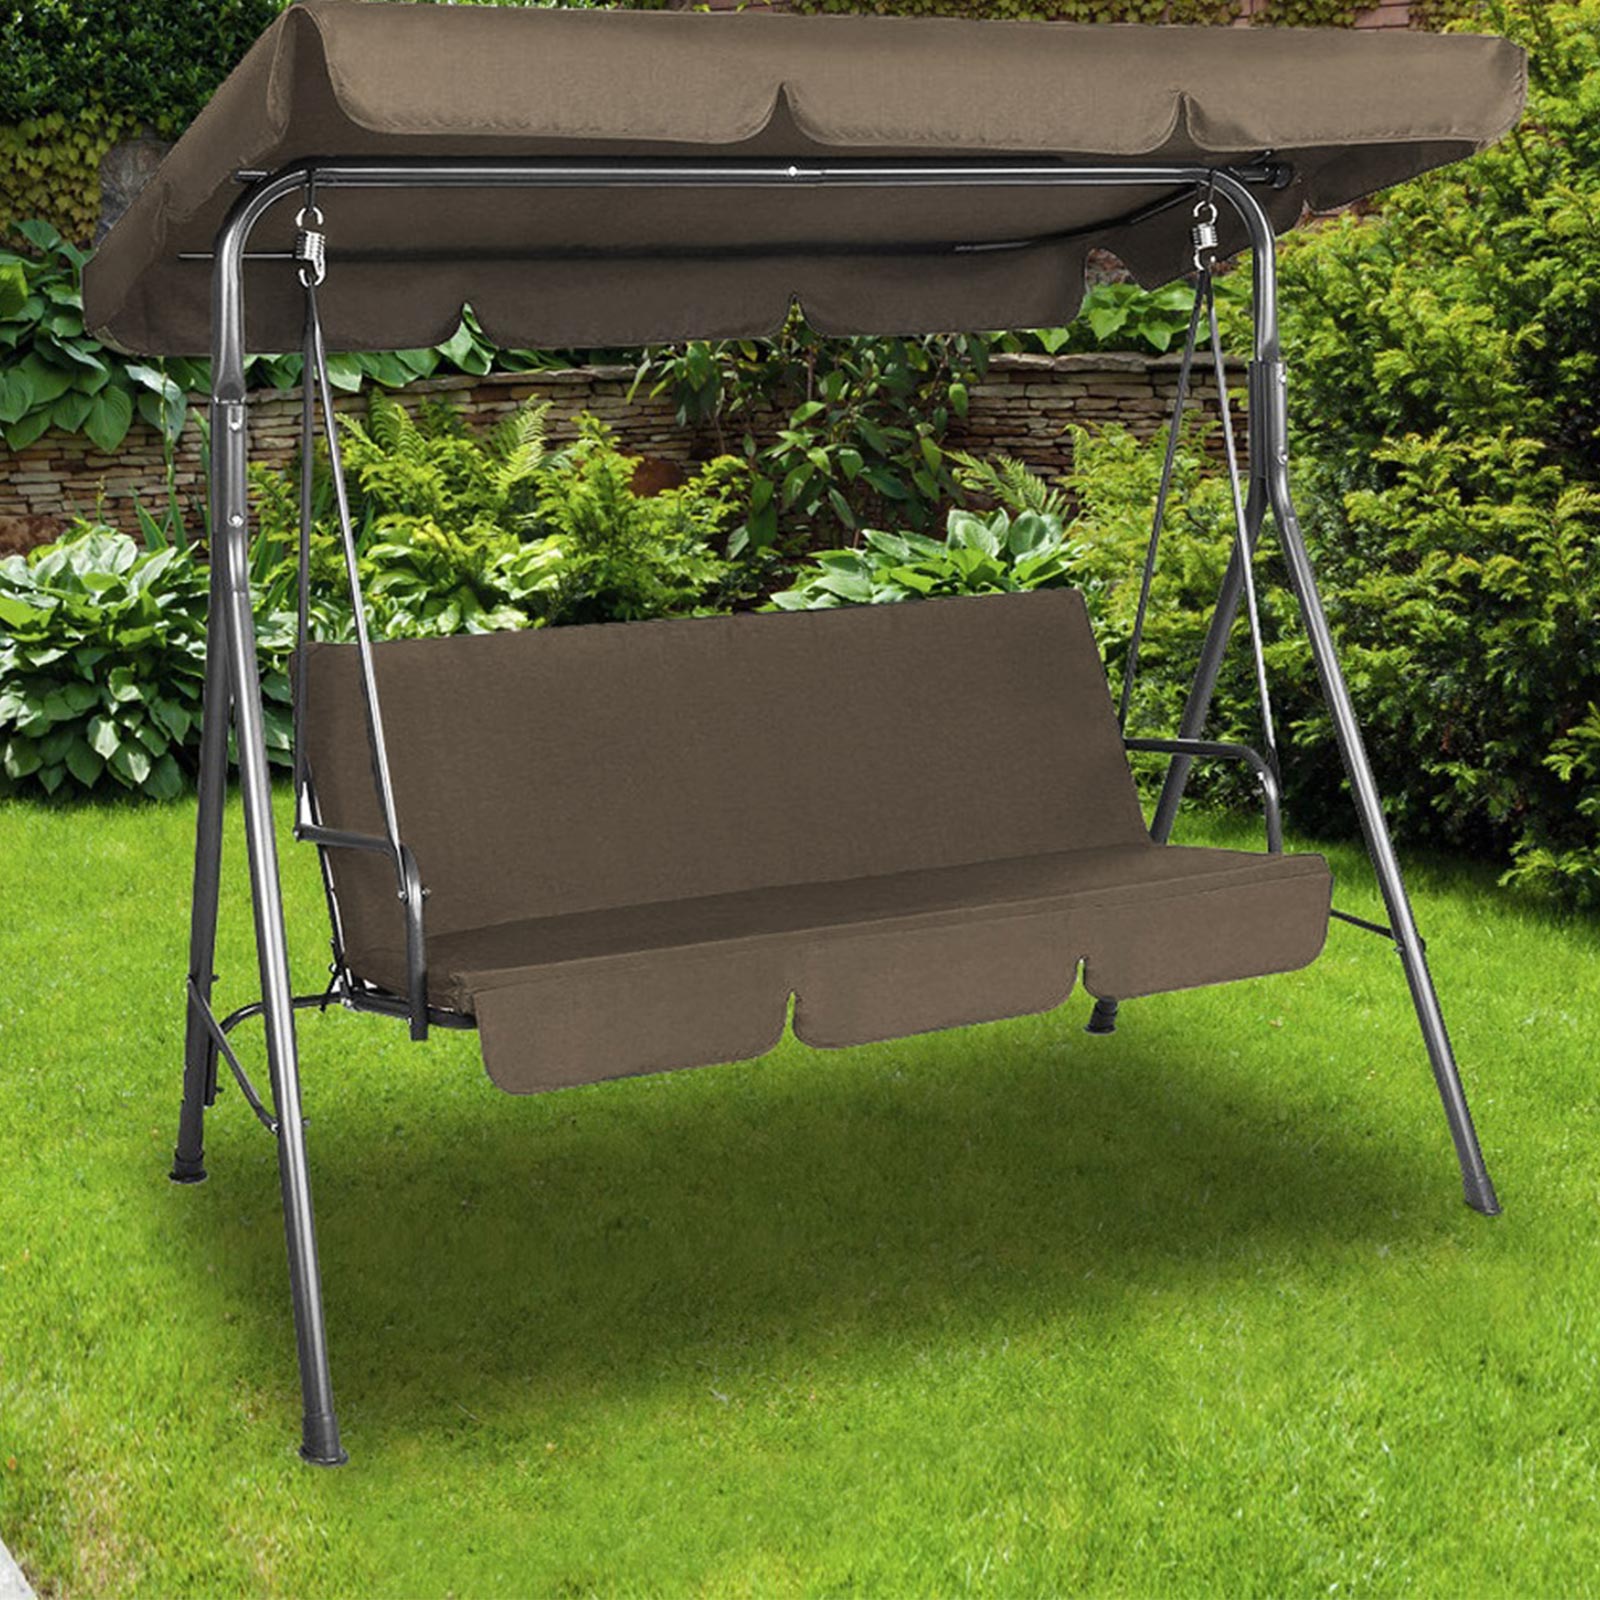 Milano Outdoor Swing Bench Seat Chair Canopy Furniture 3 Seater Garden Hammock - Coffee - image3